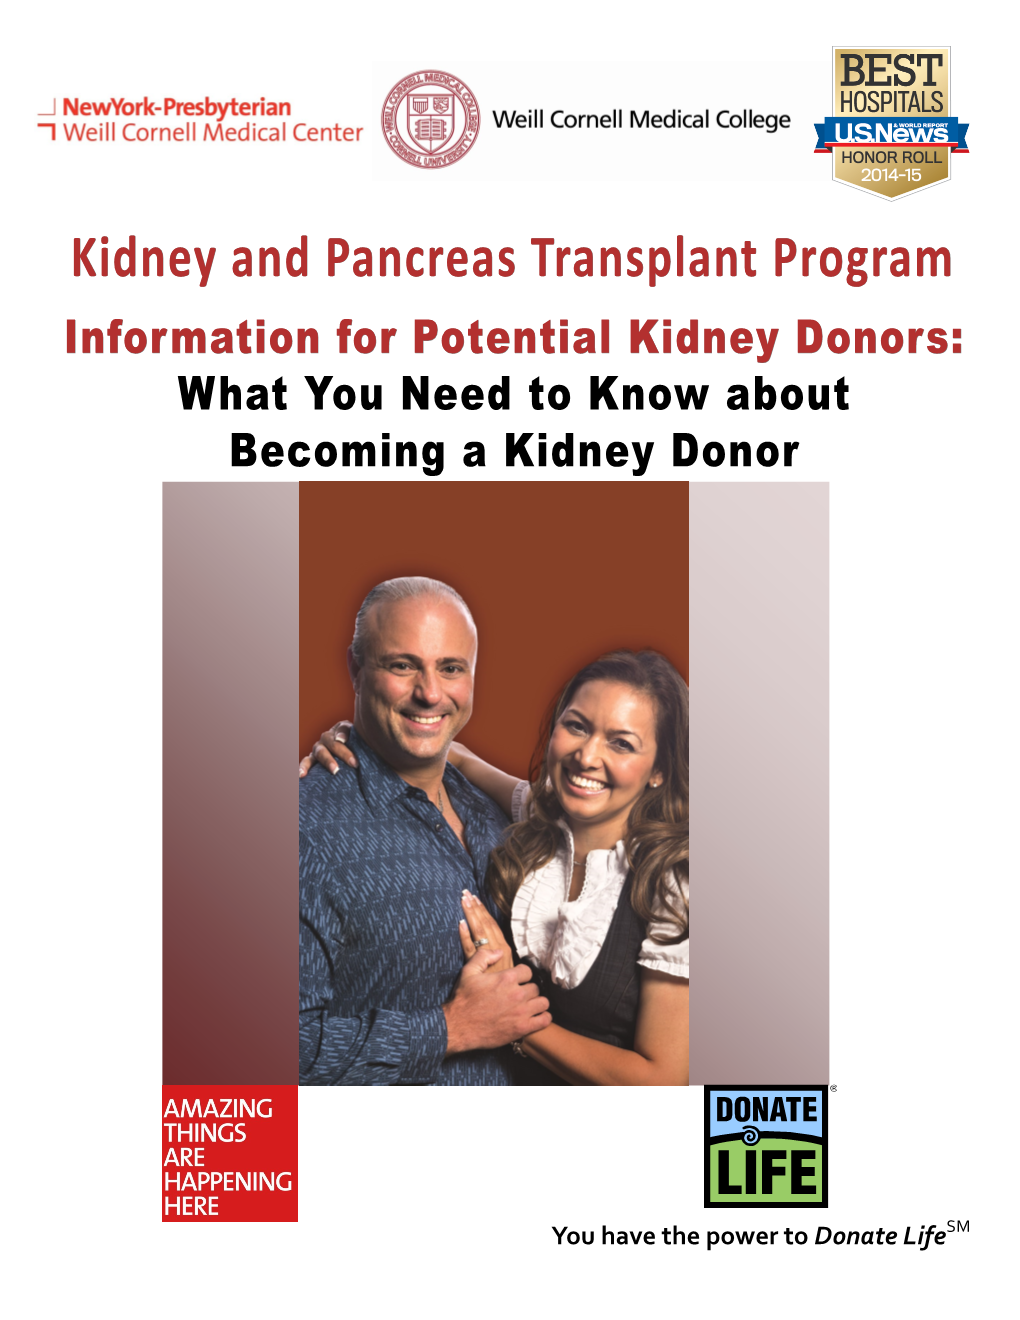 Kidney and Pancreas Transplant Program Information for Potential Kidney Donors: What You Need to Know About Becoming a Kidney Donor